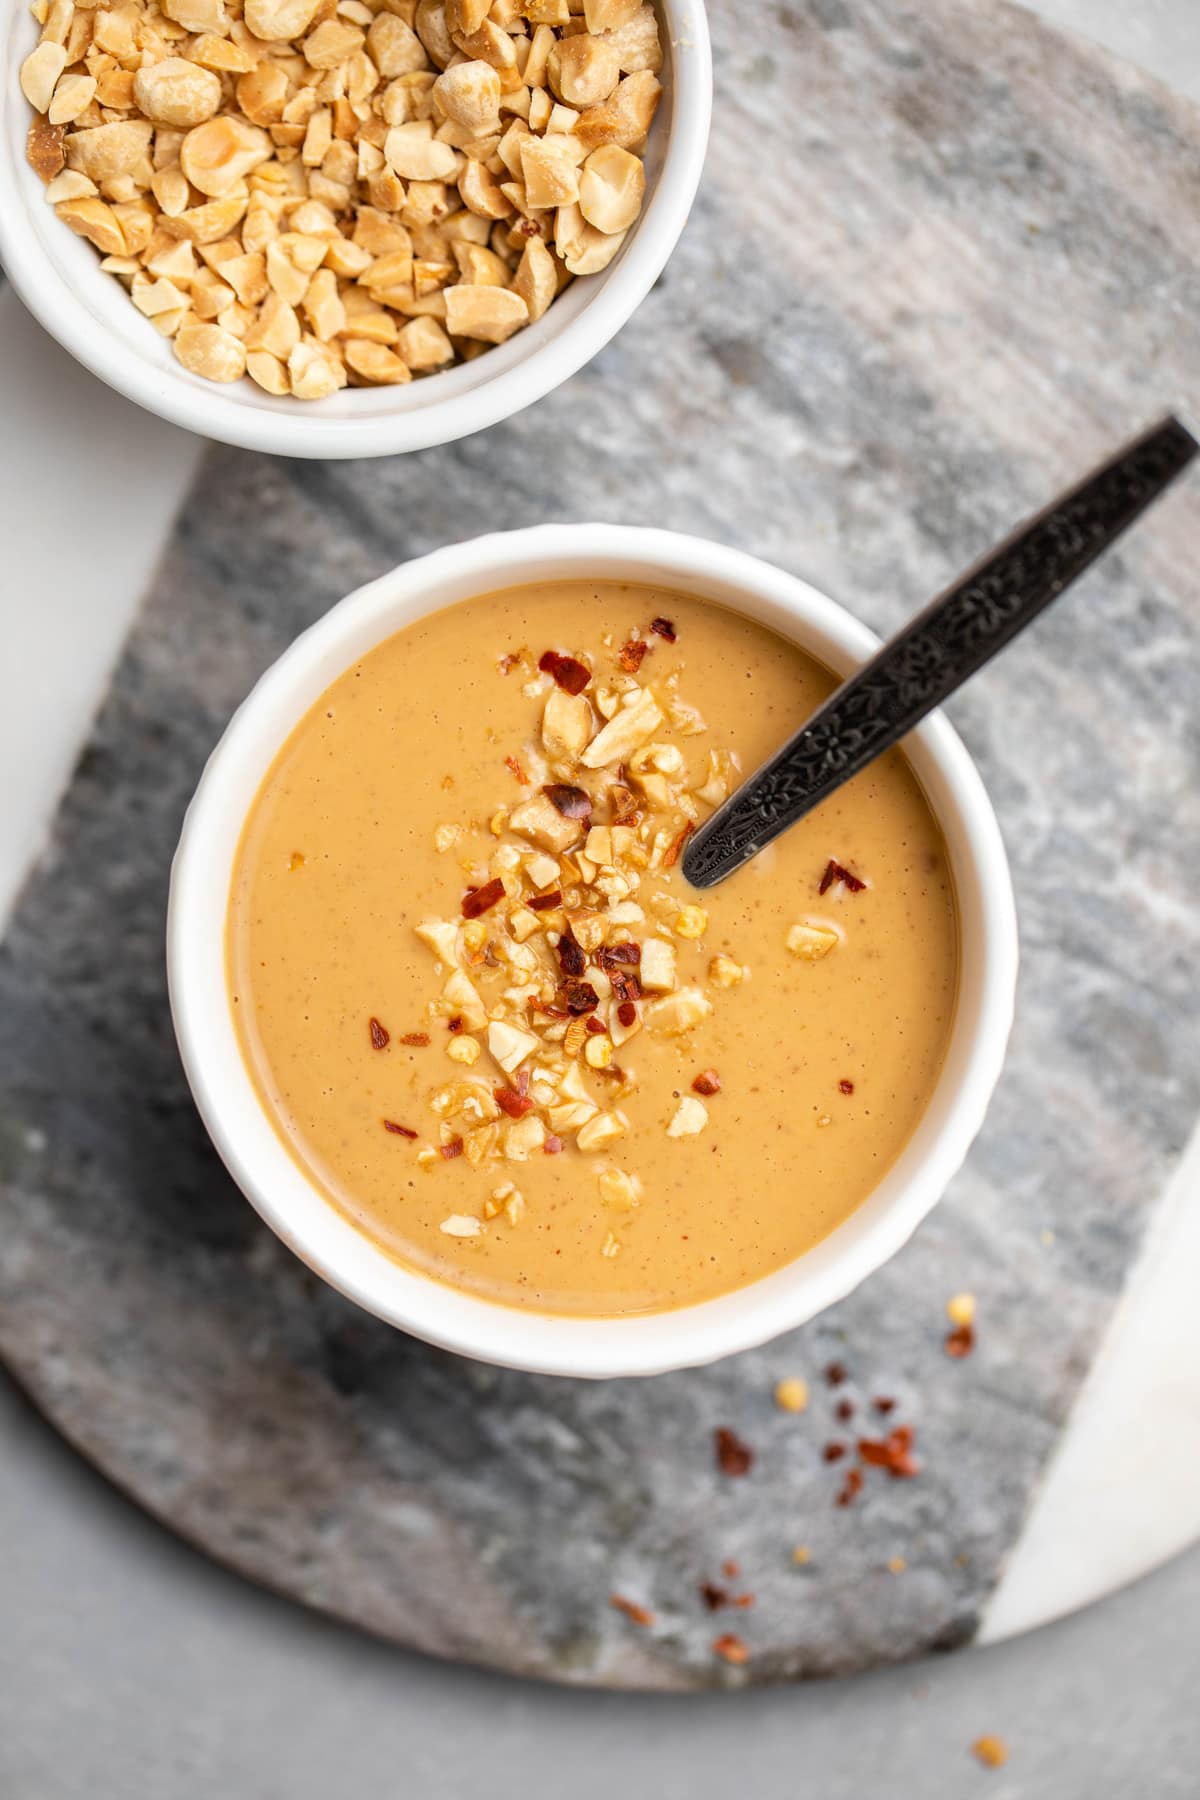 peanut sauce topped with chopped peanuts and chili flakes in small white bowl